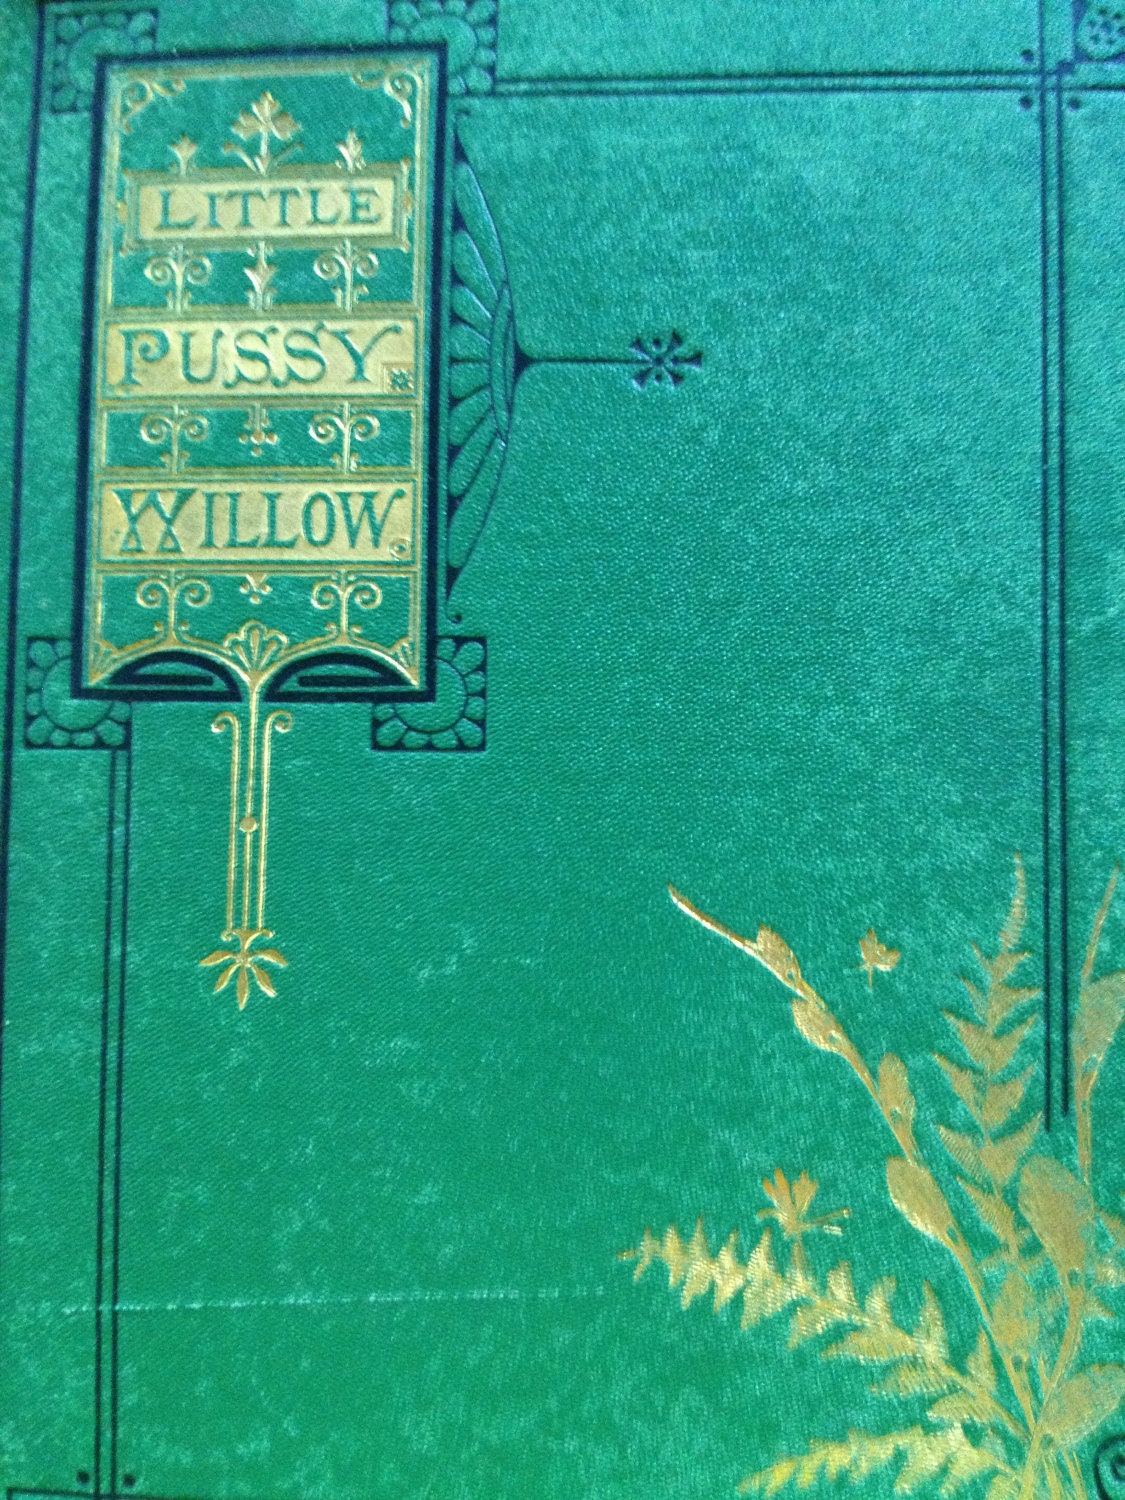 Little Pussy Willow (1870)